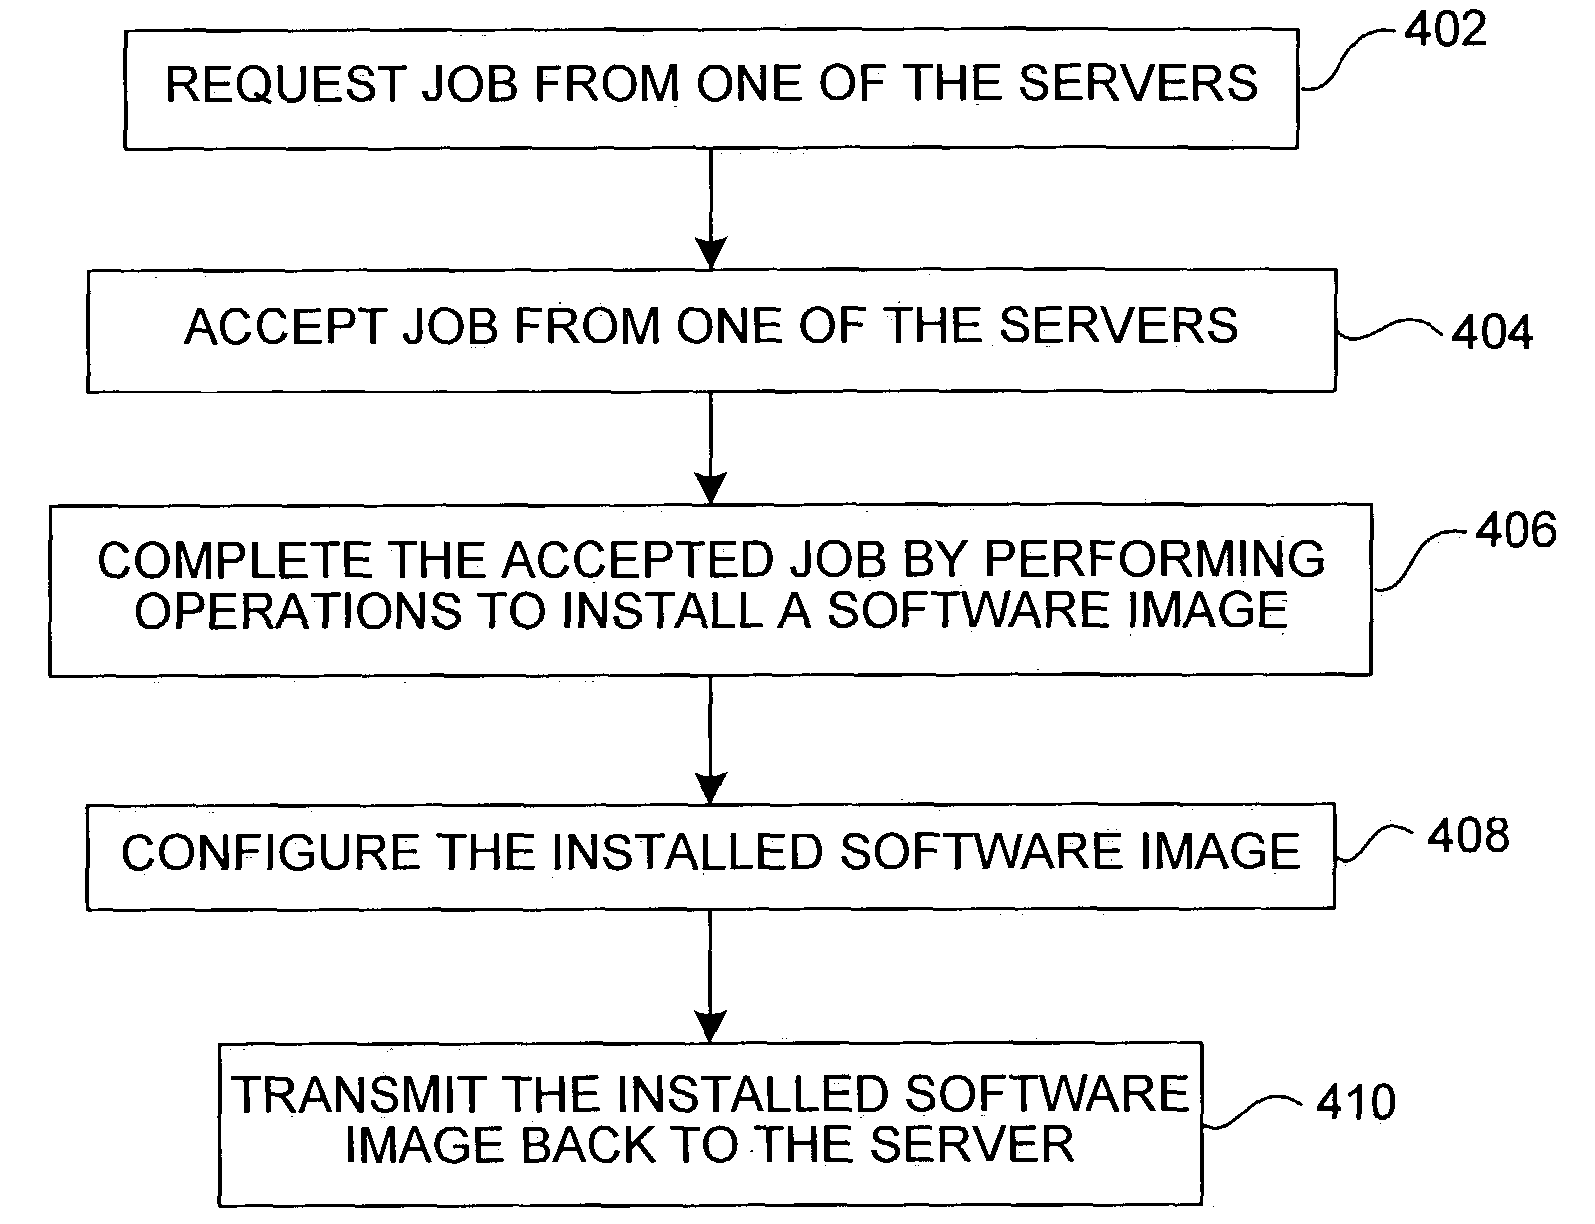 Software image creation in a distributed build environment